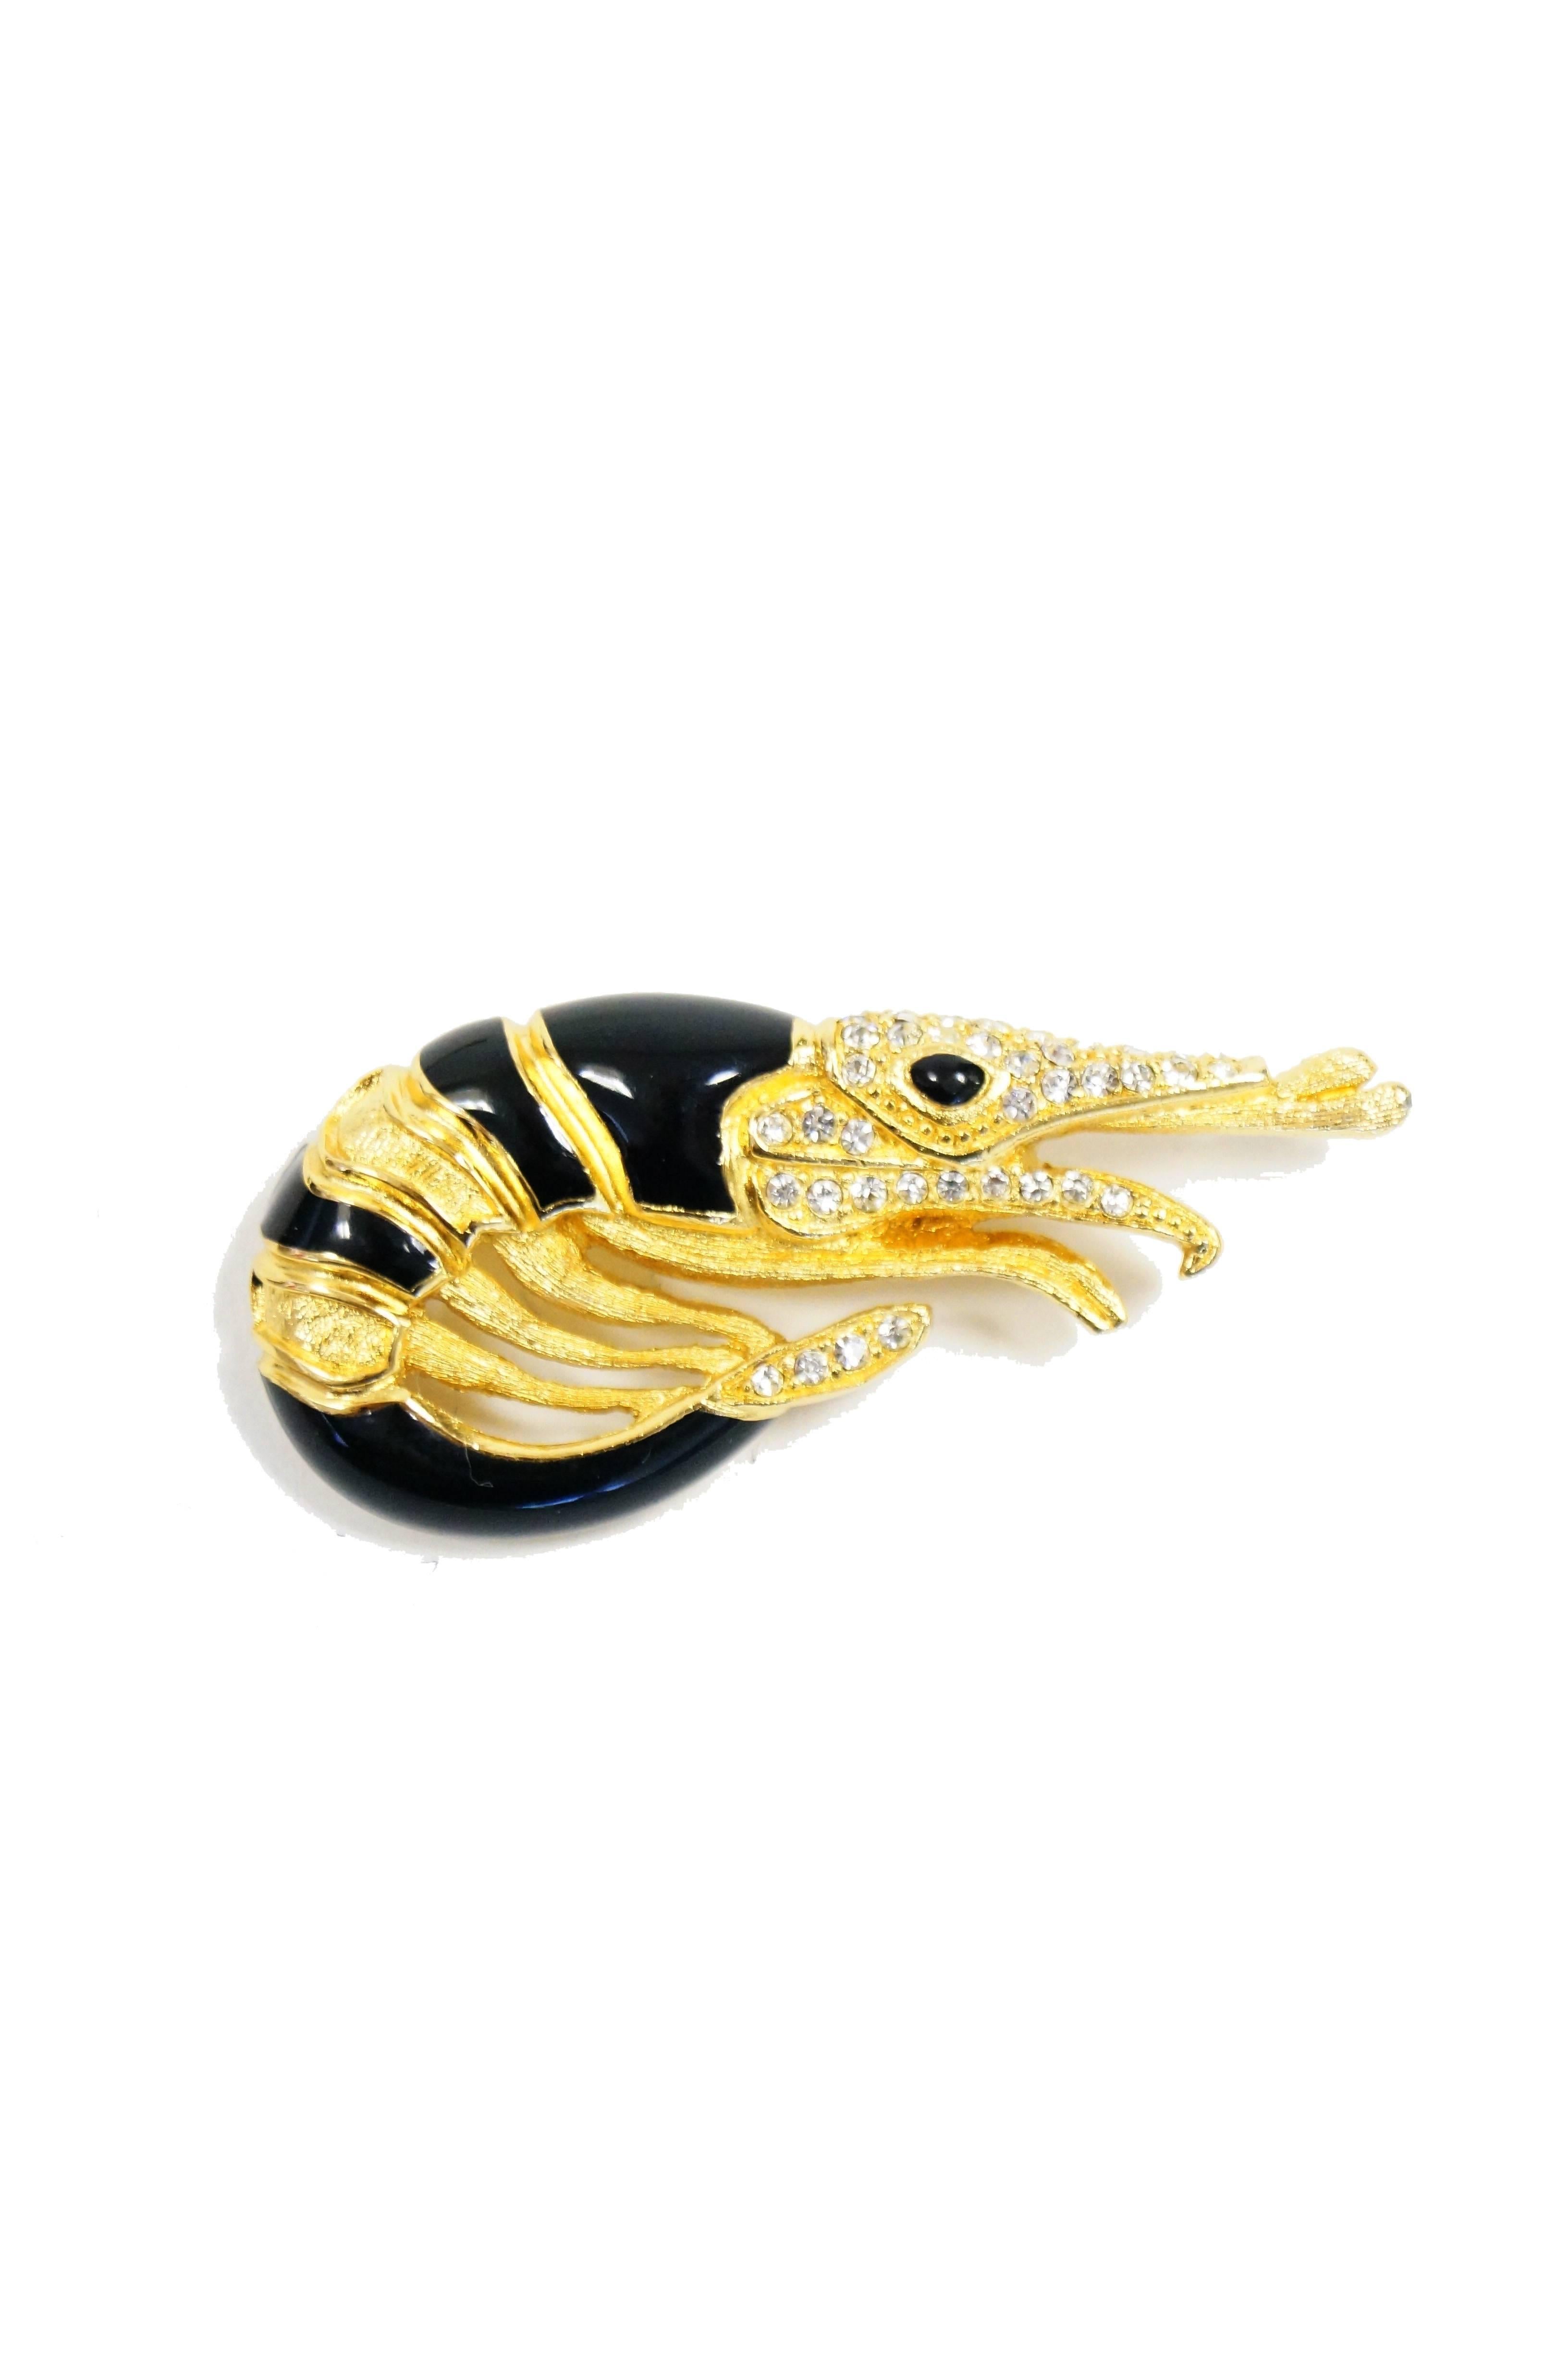 Whimsical black and gold tone Christian Dior shrimp brooch. The shrimp is primarily gold, with accent bands of black enamel. The shrimp's eye is a brilliant black enamel oval, and its rostrum and tail are accented with crystal pave rhinestones.